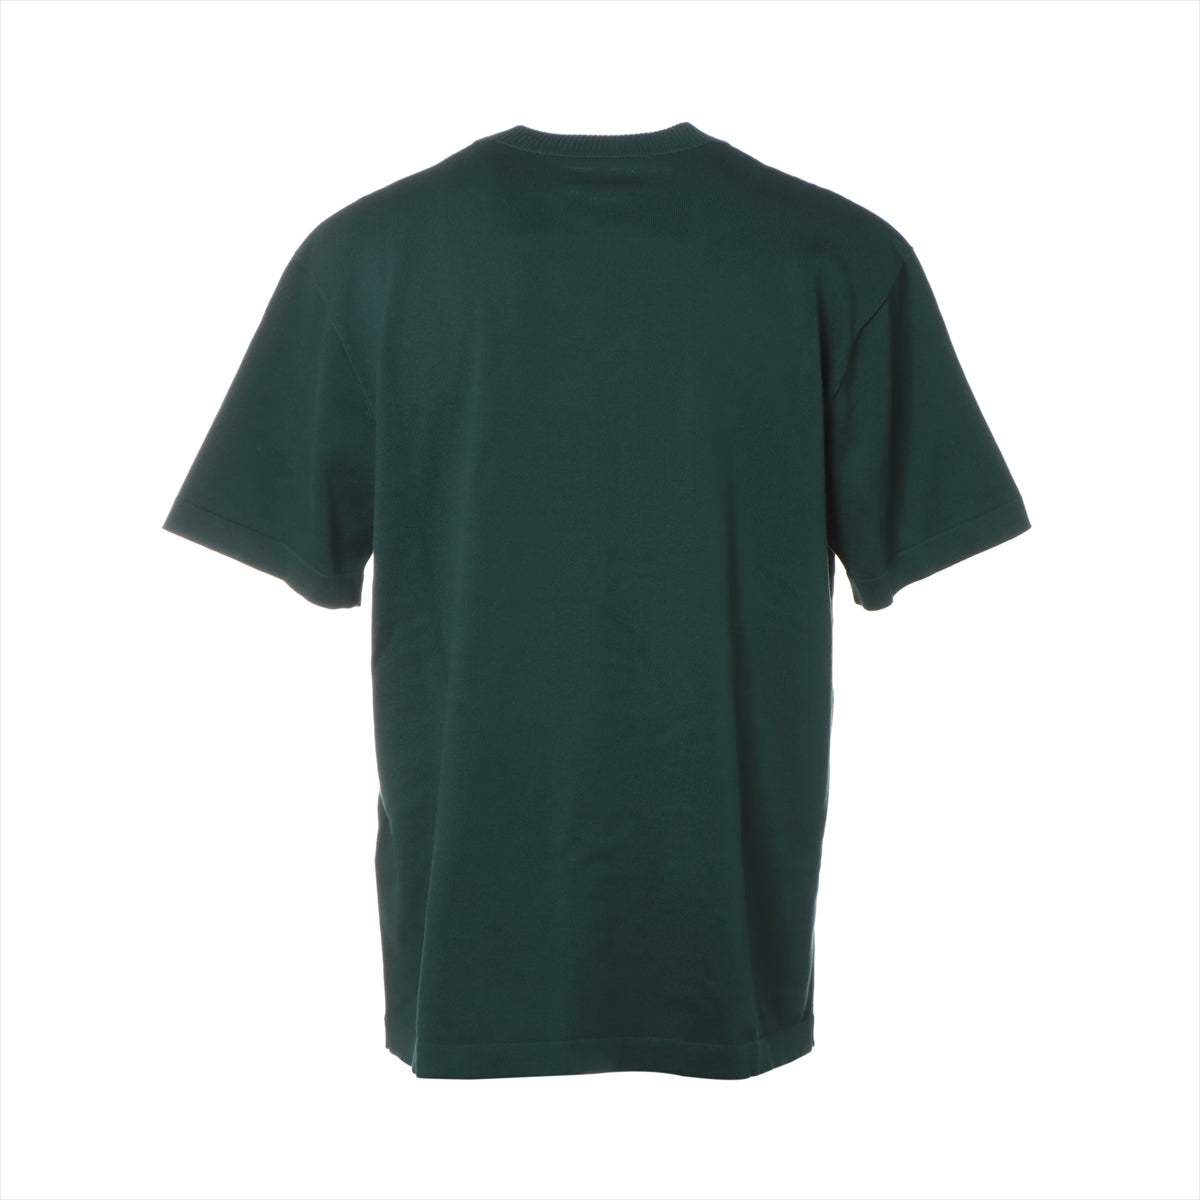 Louis Vuitton 23SS Cotton T-shirt L Men's Green  RM231MQ Logo embroidery with tag knit material